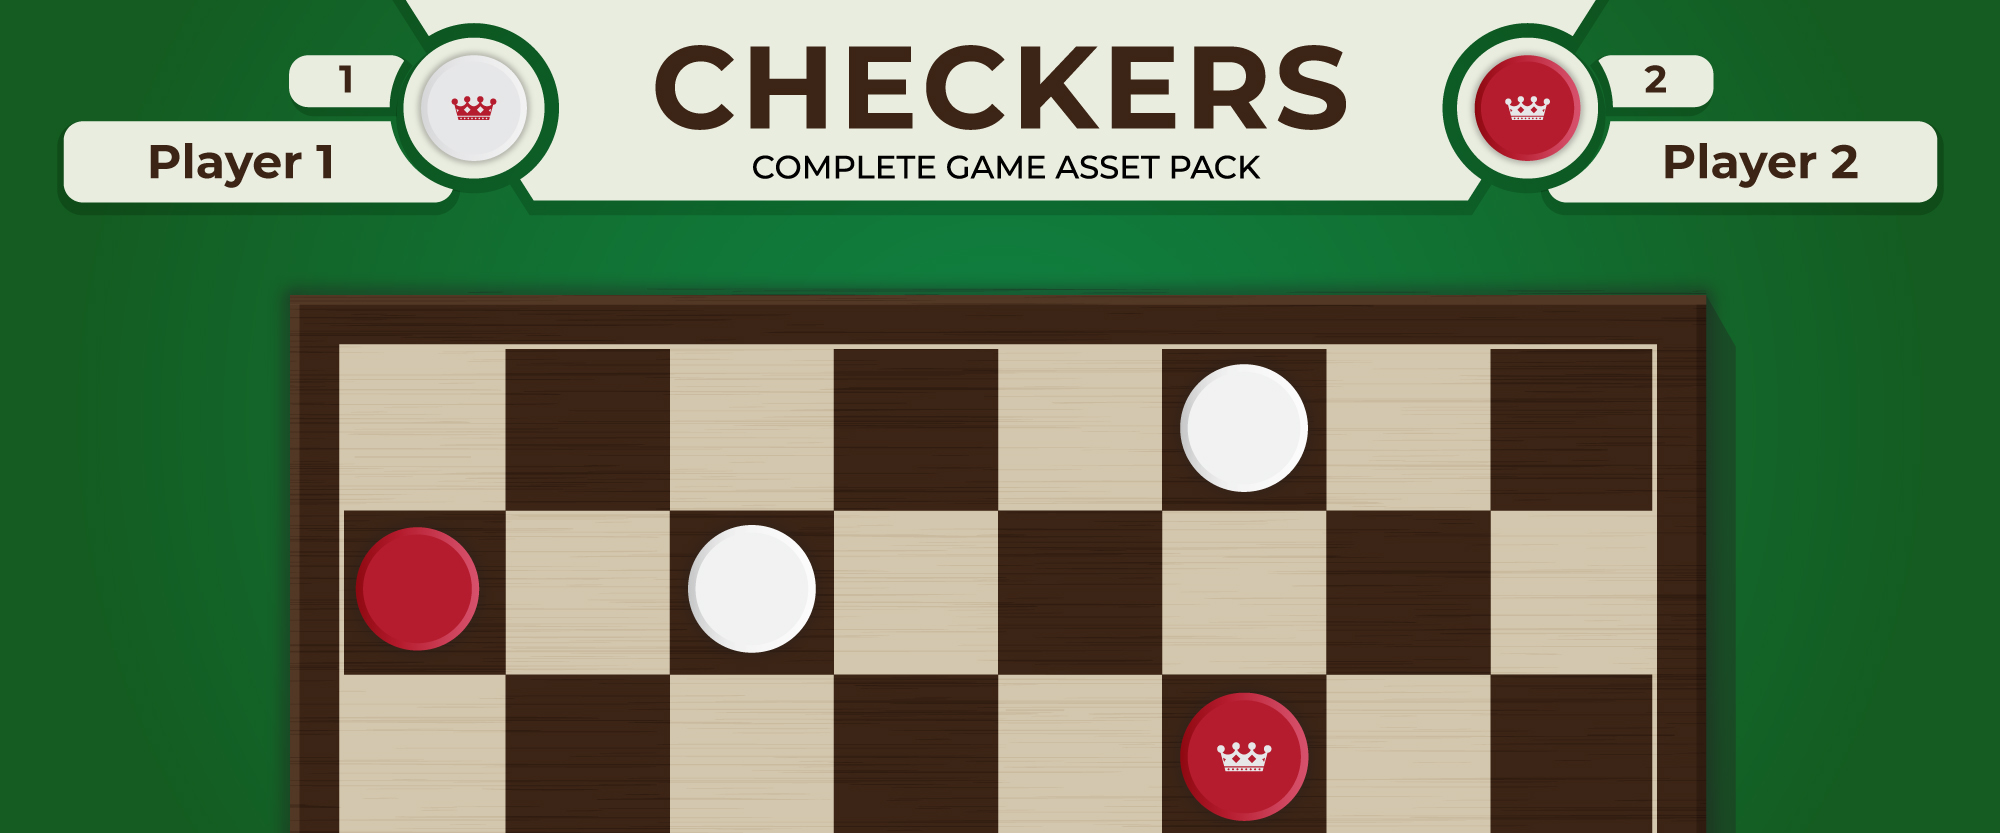 Checkers (Draughts) Complete Asset Pack